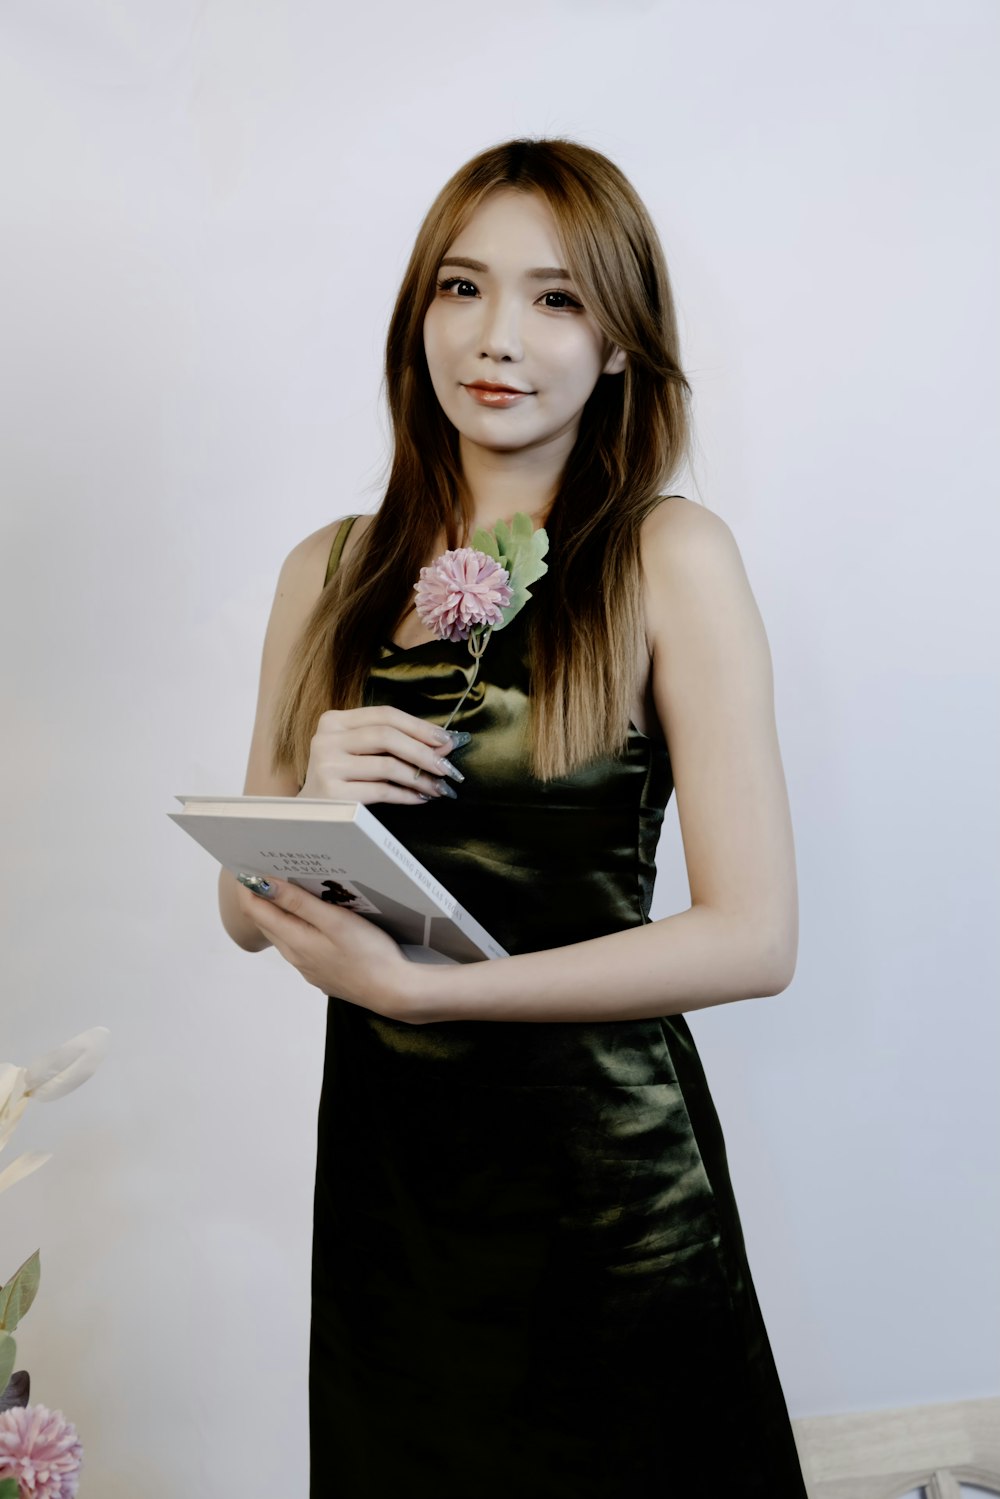 a woman in a black dress holding a book